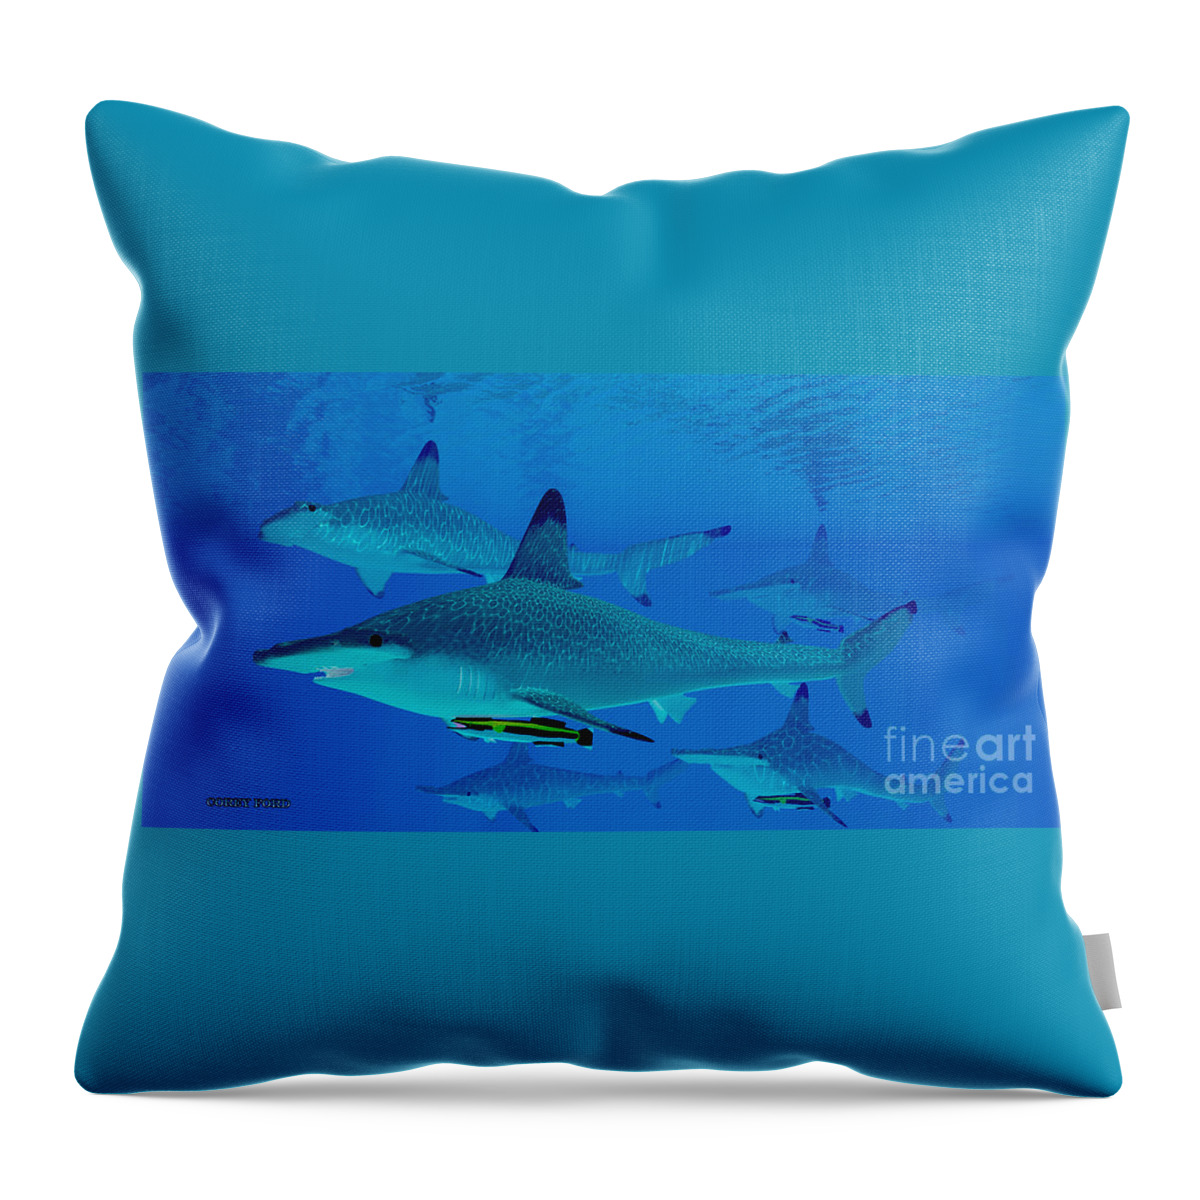 Hammerhead Shark Throw Pillow featuring the painting Hammerhead Sharks by Corey Ford